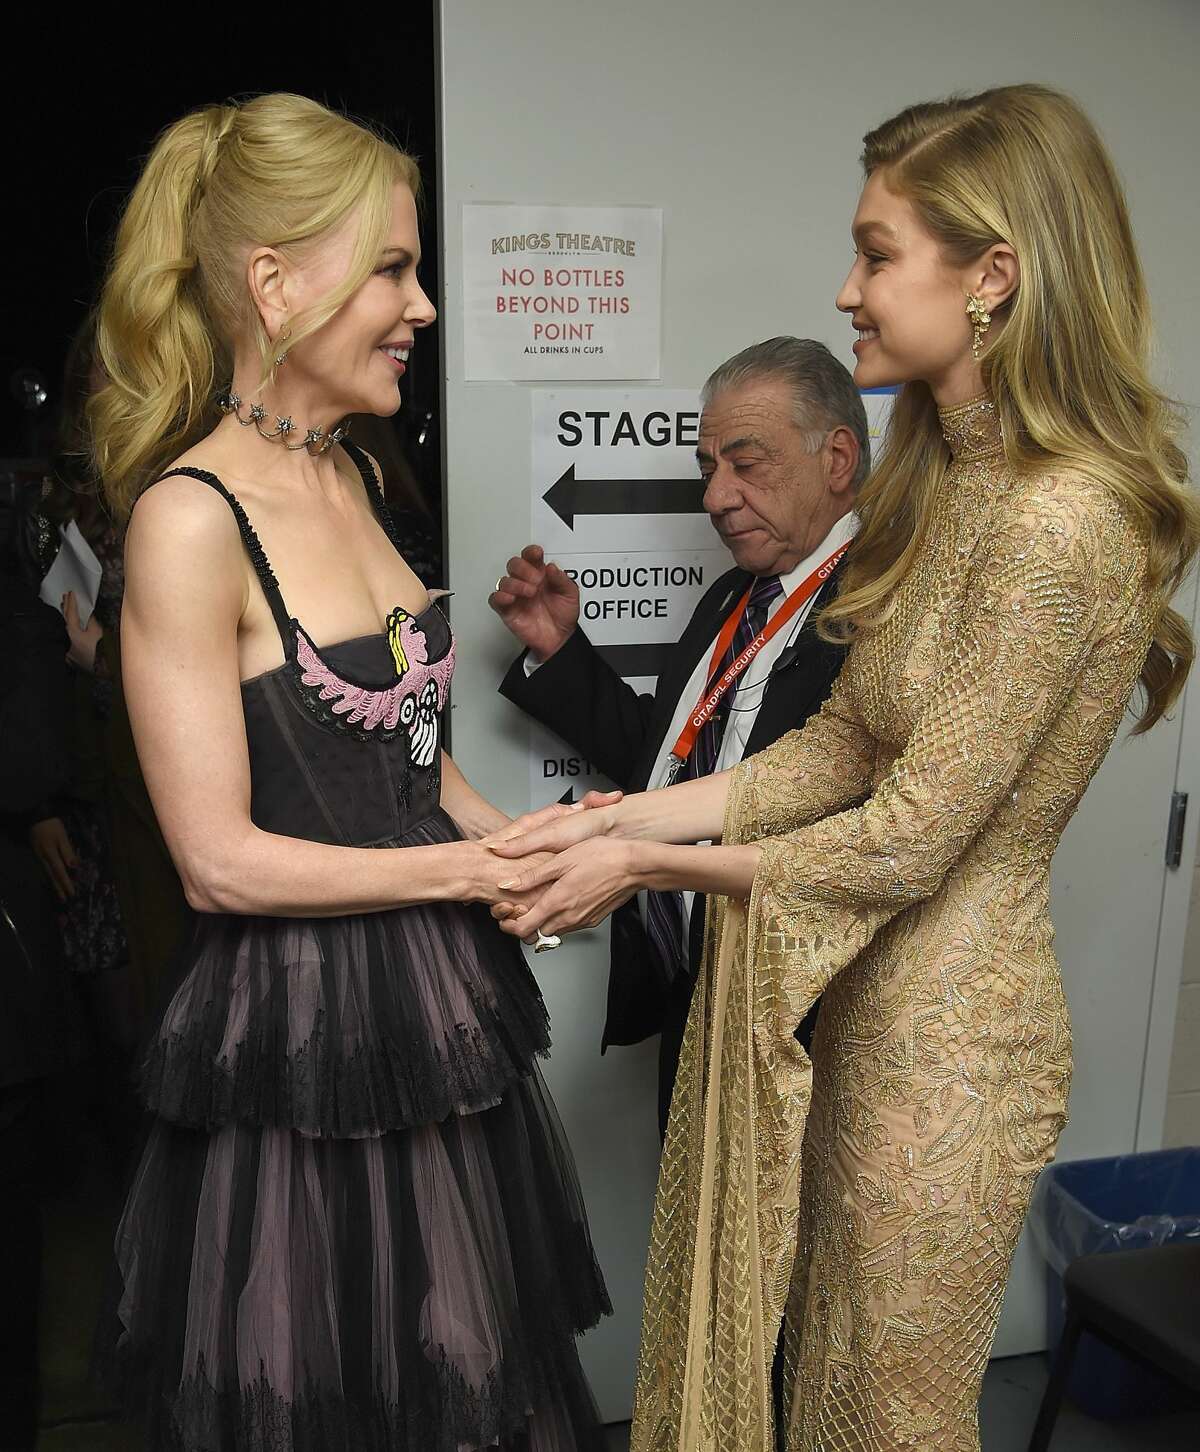 Nicole Kidman and Gigi Hadid pose backstage at Glamour's 2017 Women of The Year Awards at Kings Theatre on November 13, 2017 in Brooklyn, New York. (Photo by Dimitrios Kambouris/Getty Images for Glamour)